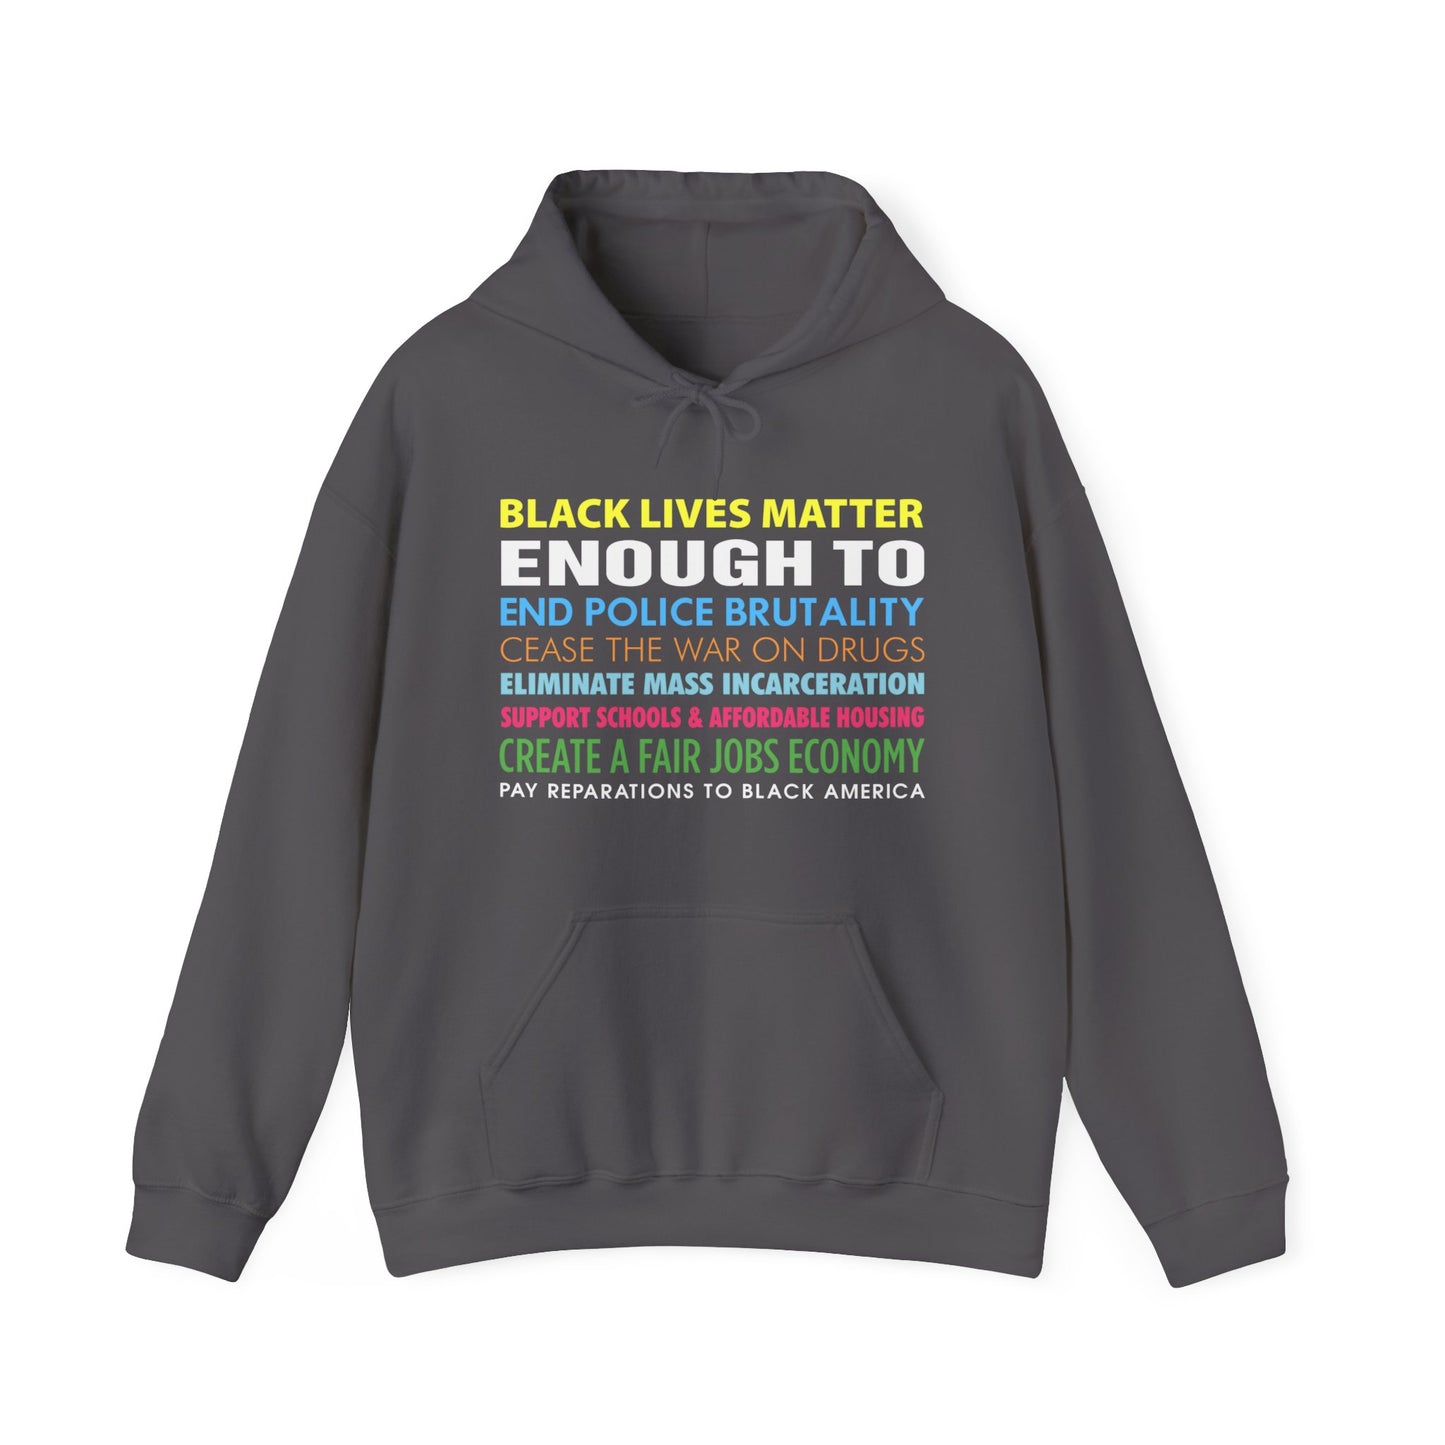 “Black Lives Matter Enough To” Unisex Hoodie